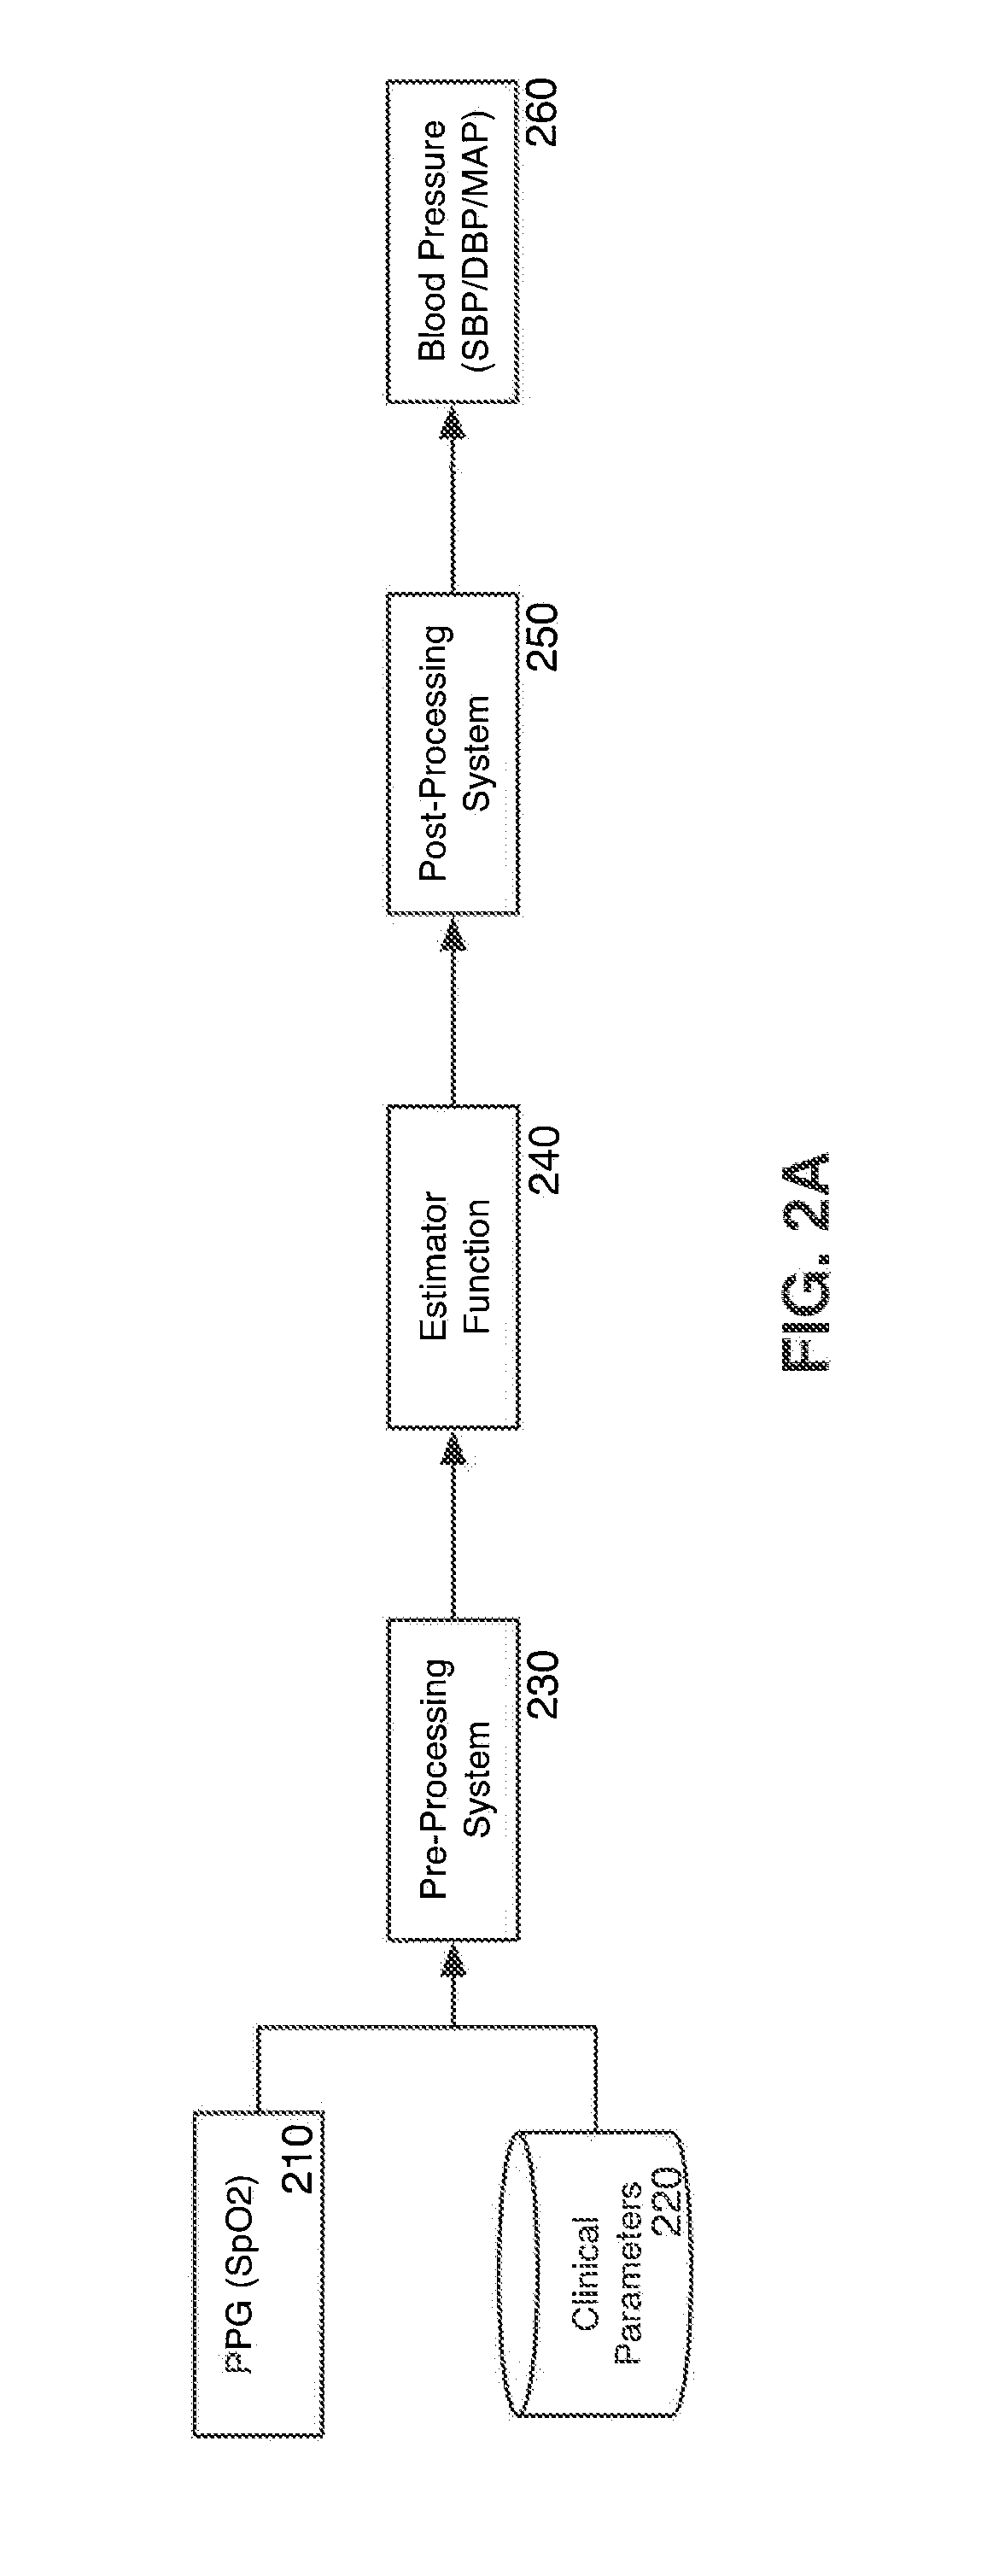 Methods and Systems for Non-Invasive Measurement of Blood Pressure